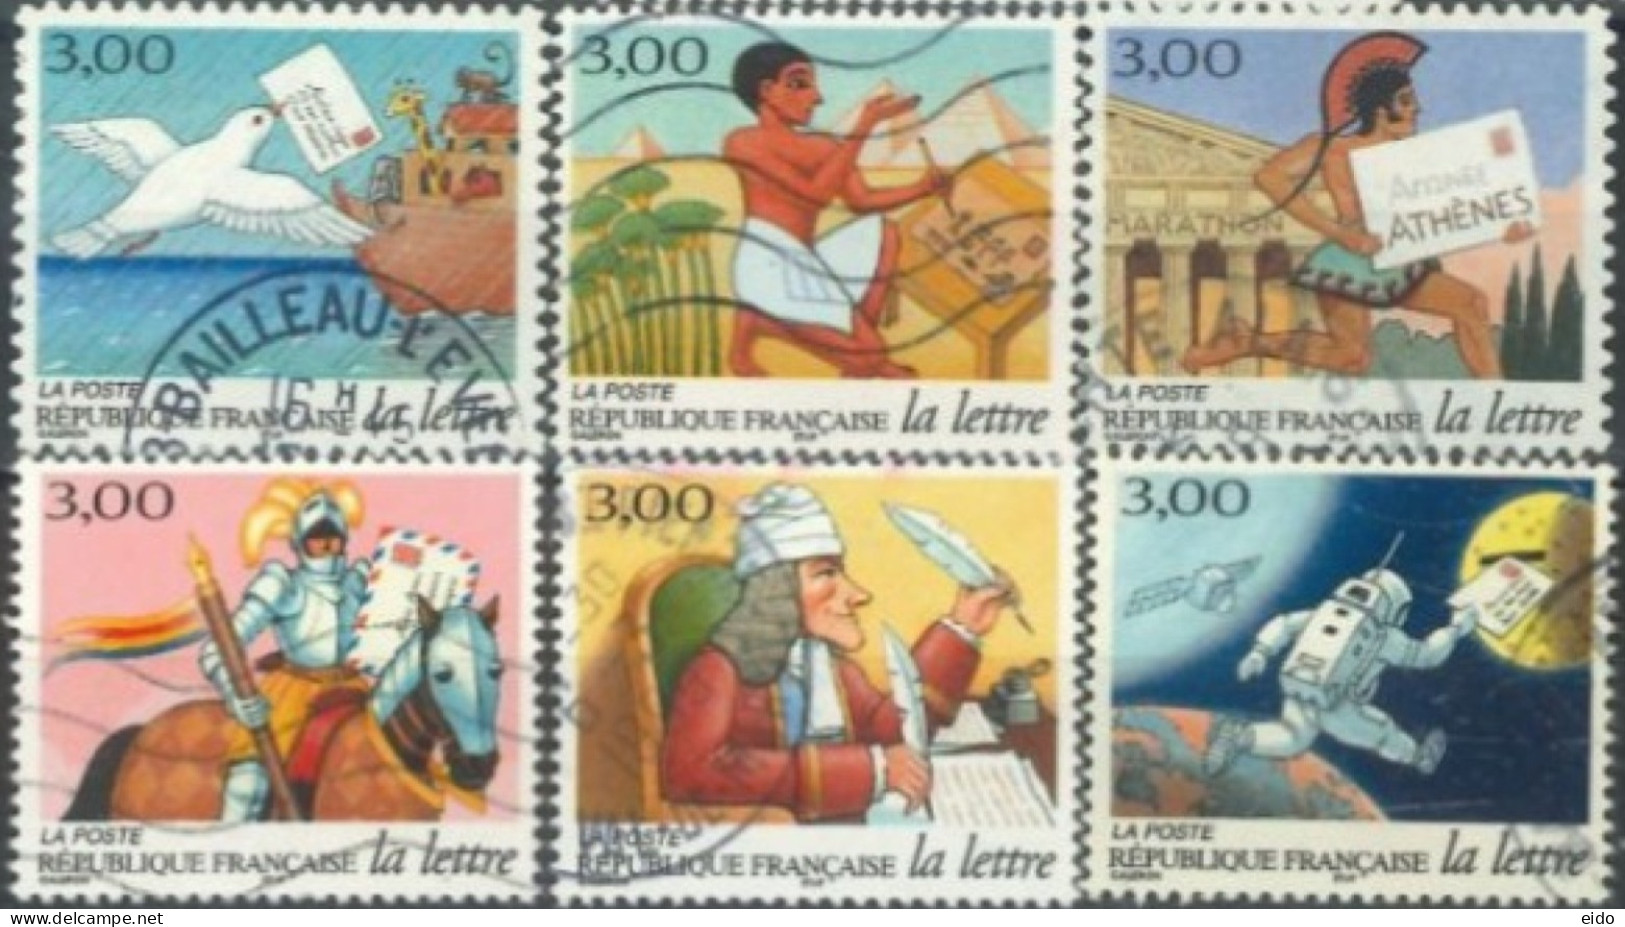 FRANCE -1998 - POST DAY AHESSIVE STAMPS COMPLETE SET OF 6,  # 3150/55, USED - Usati